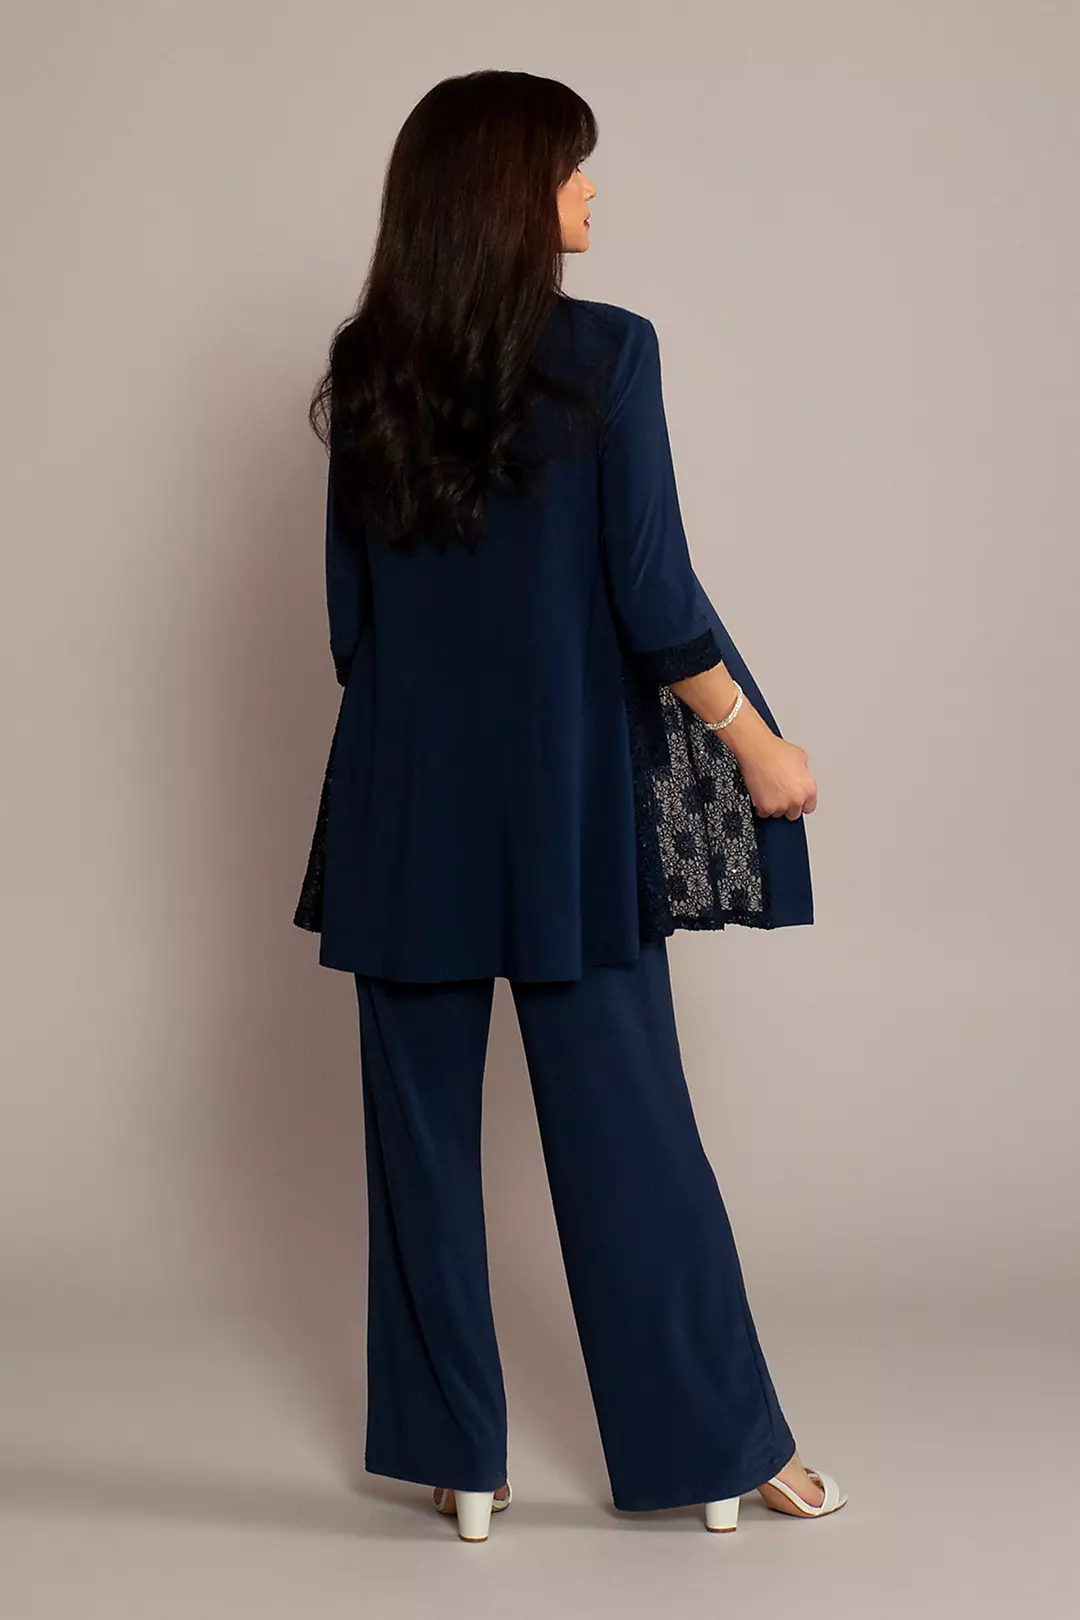 Polished Navy Blue 2-piece Pants and Blazer Suit. Also Available in Teal,  Turquoise, Pale Yellow. Women's Formal Suits, Wedding Suits 